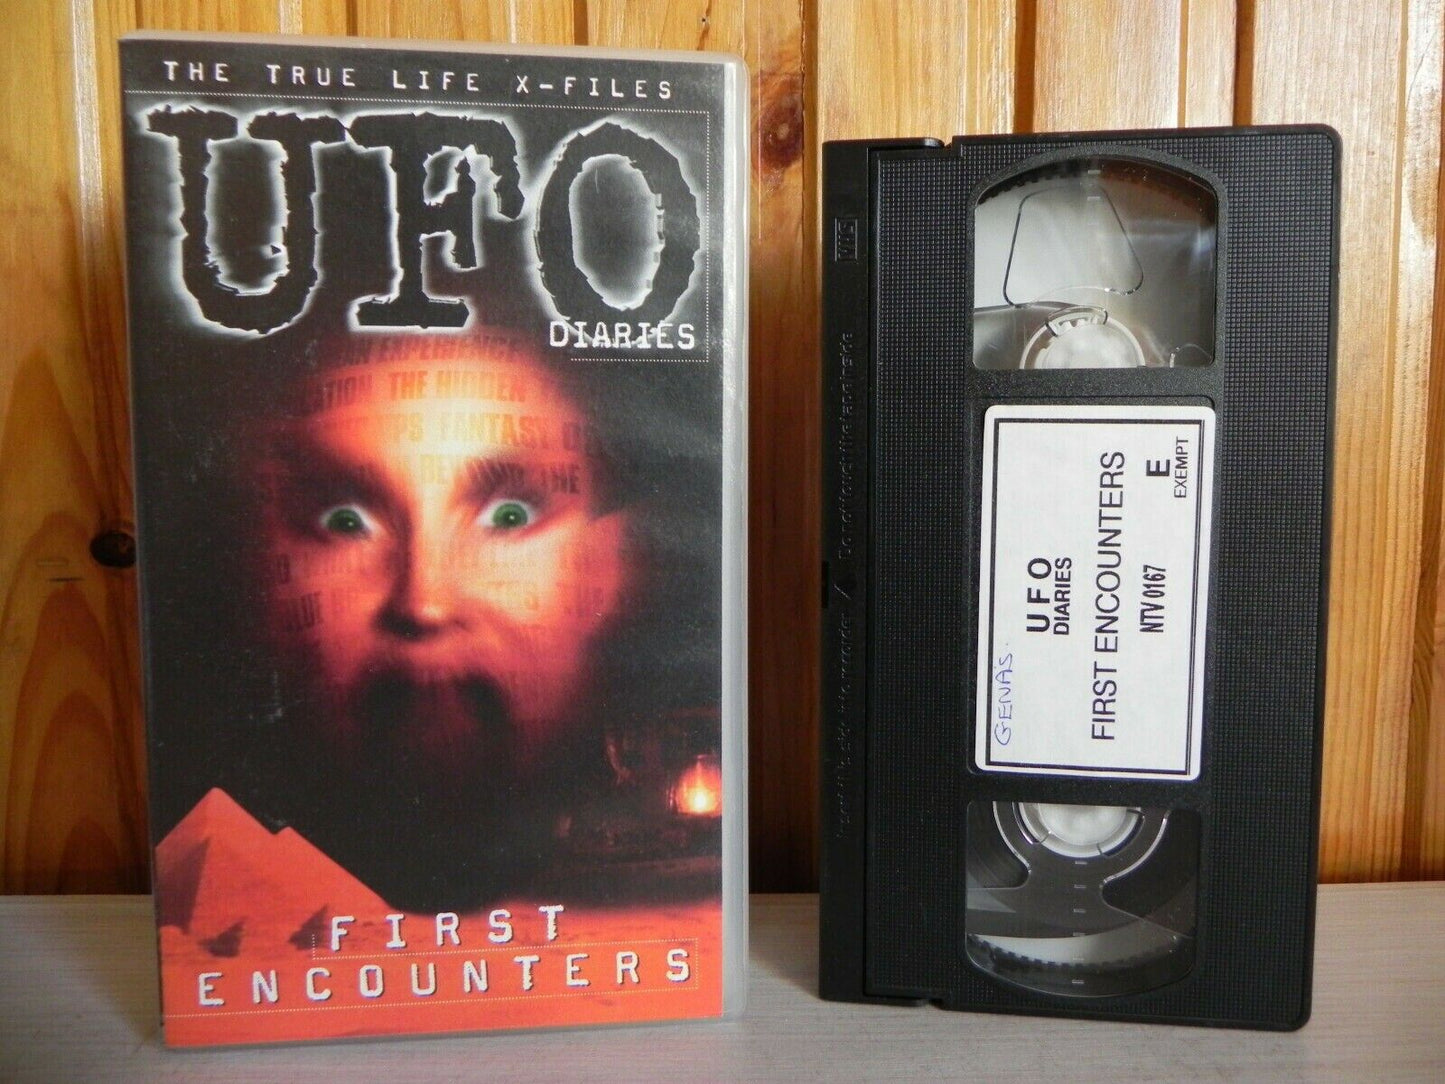 UFO Diaries - First Encounters - The True Life X-Files - The First UFO's - VHS-